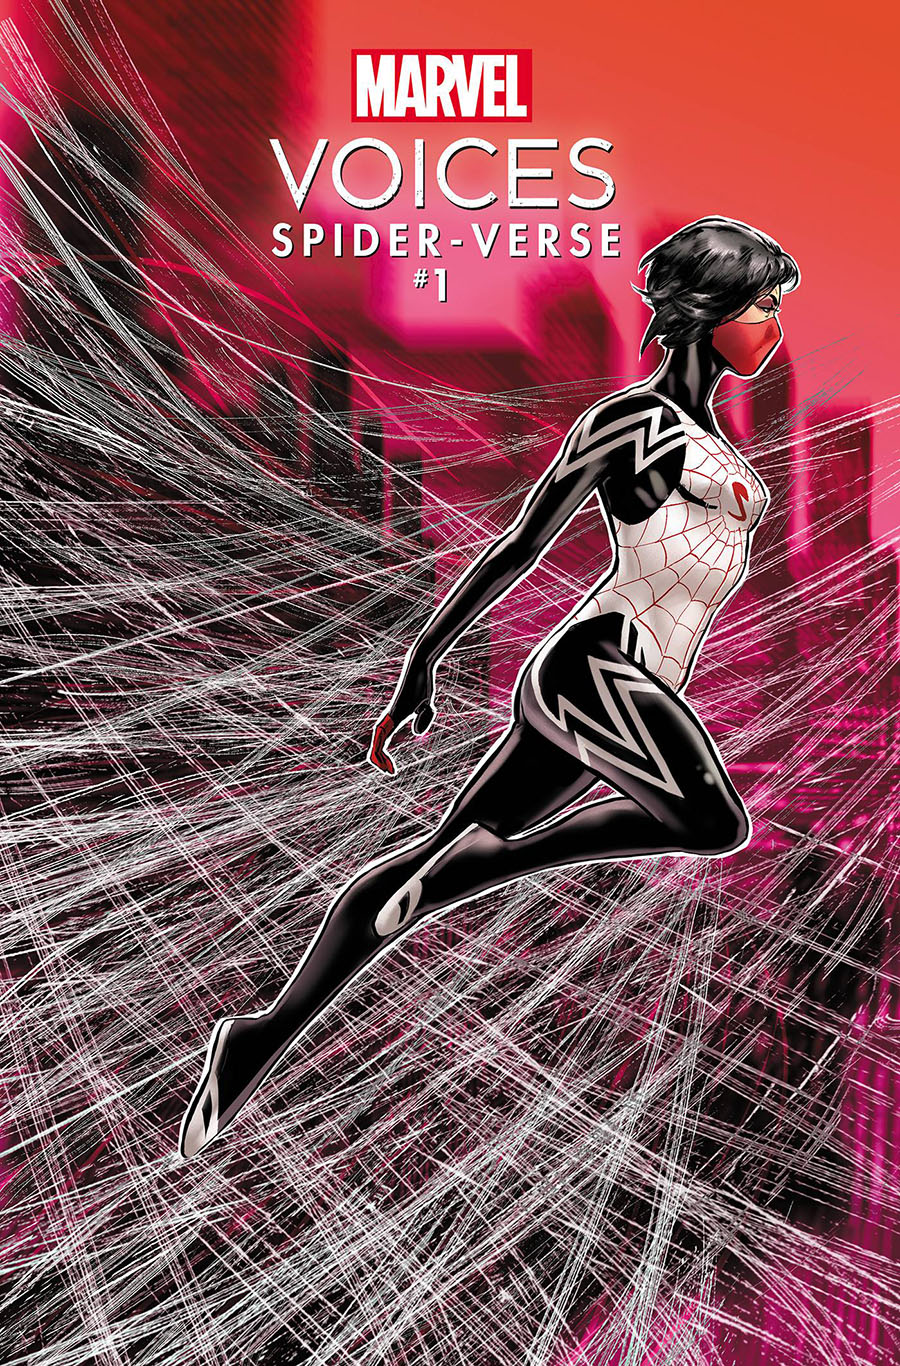 Marvels Voices Spider-Verse #1 (One Shot) Cover C Variant Phil Jimenez Cover